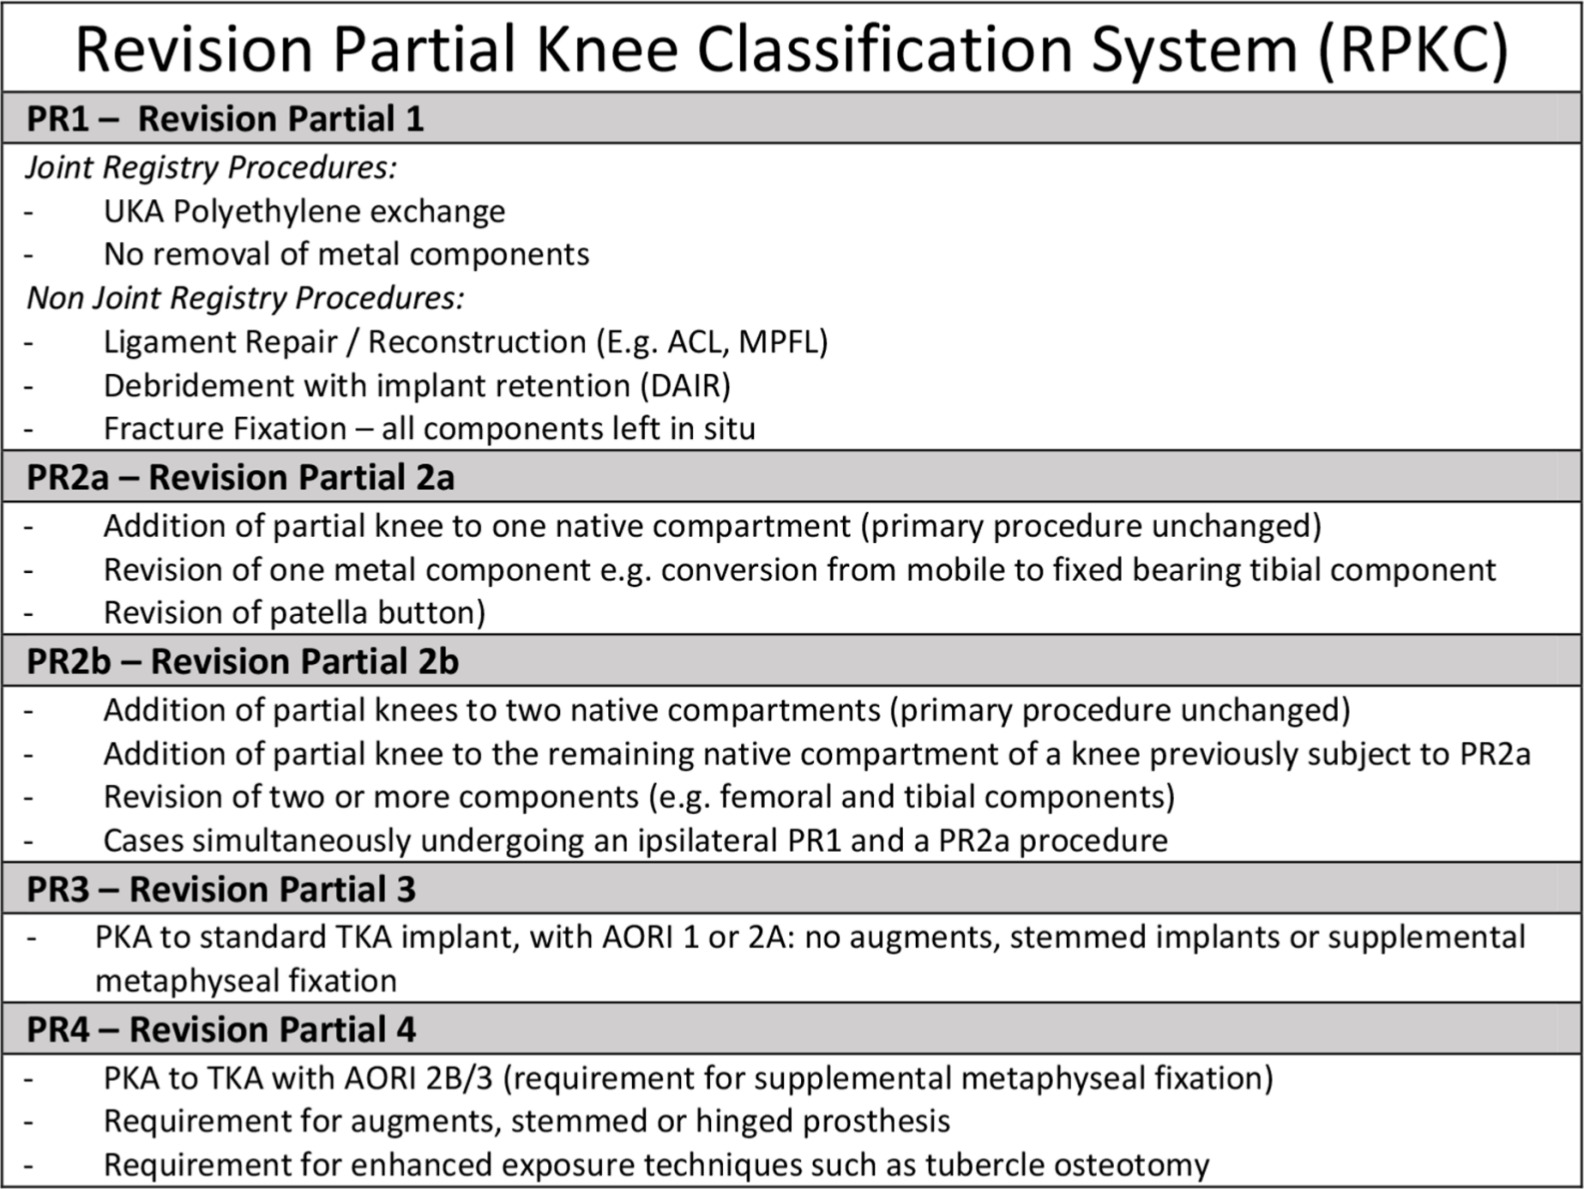 Fig. 3 
            Newly-defined revision partial knee classification (RPKC) system. ACL, anterior cruciate ligament; AORI, Anderson Orthopaedic Research Institute; MPFL, medial patellofemoral ligament; PKA, partial knee arthroplasty; TKA, total knee arthroplasty.
          